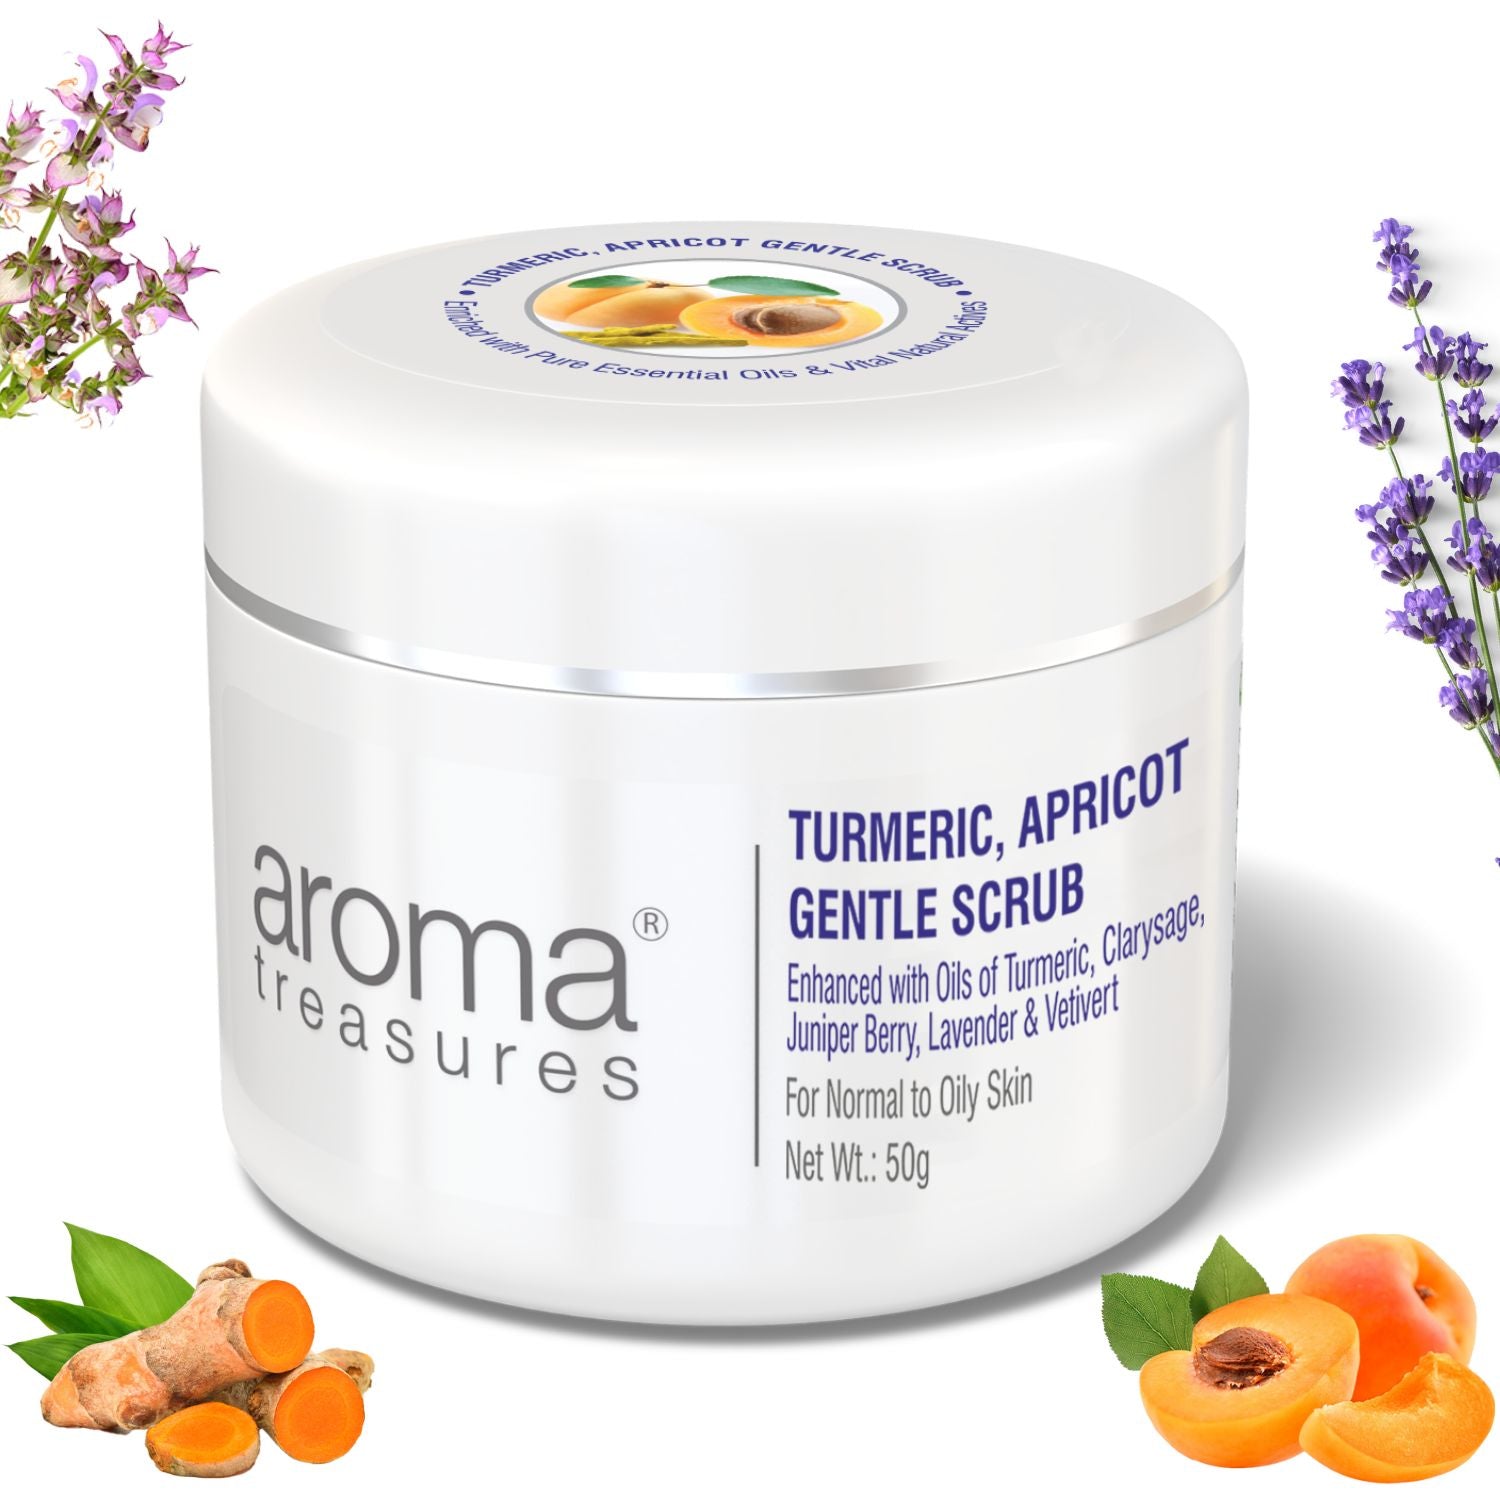 Aroma Treasures Turmeric, Apricot Gentle Scrub (For Normal to Oily Skin)